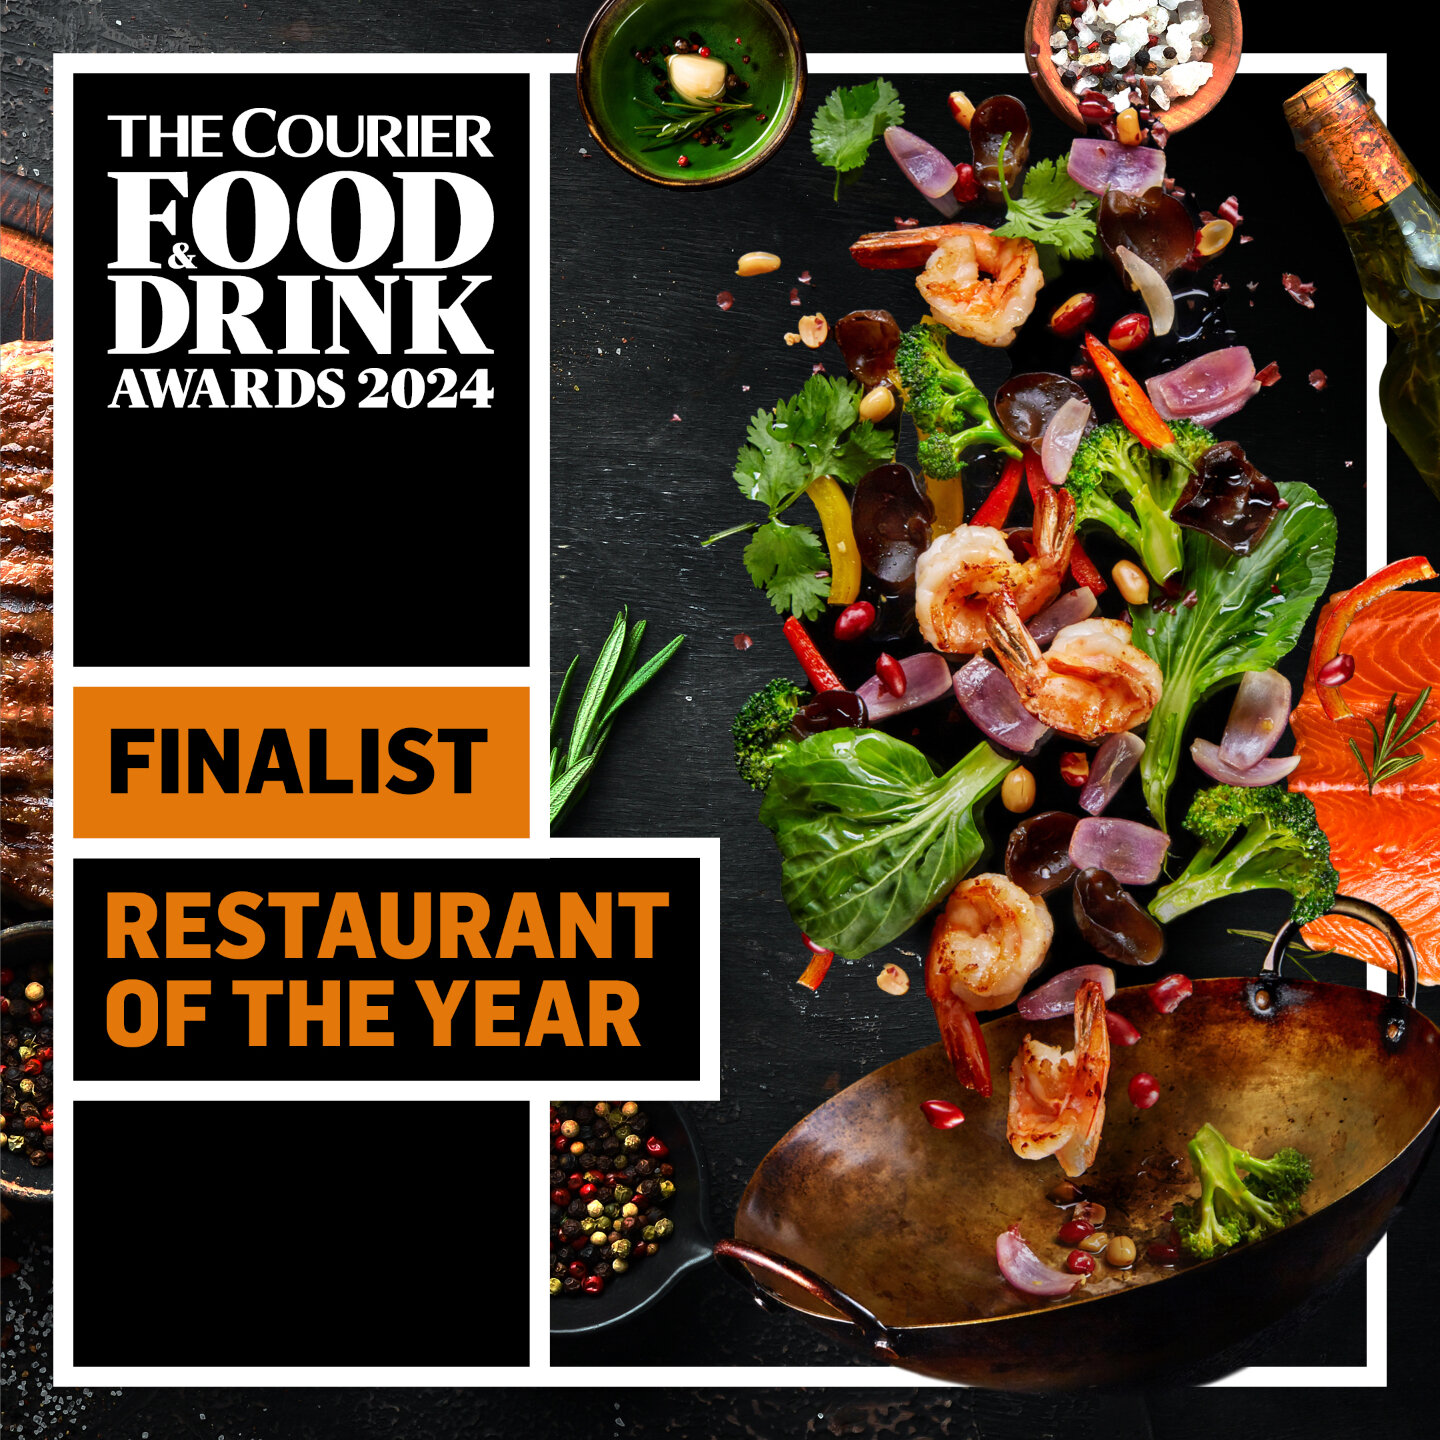 🎉 Today, we're off to the Courier Food and Drink Awards! 

🏆 As a result, The Boar's Head will be closed for the day. 🚪 

Thank you for your support, and we'll share our experiences with you soon!

#courierfoodanddrinkawards #restaurant #fiferesta